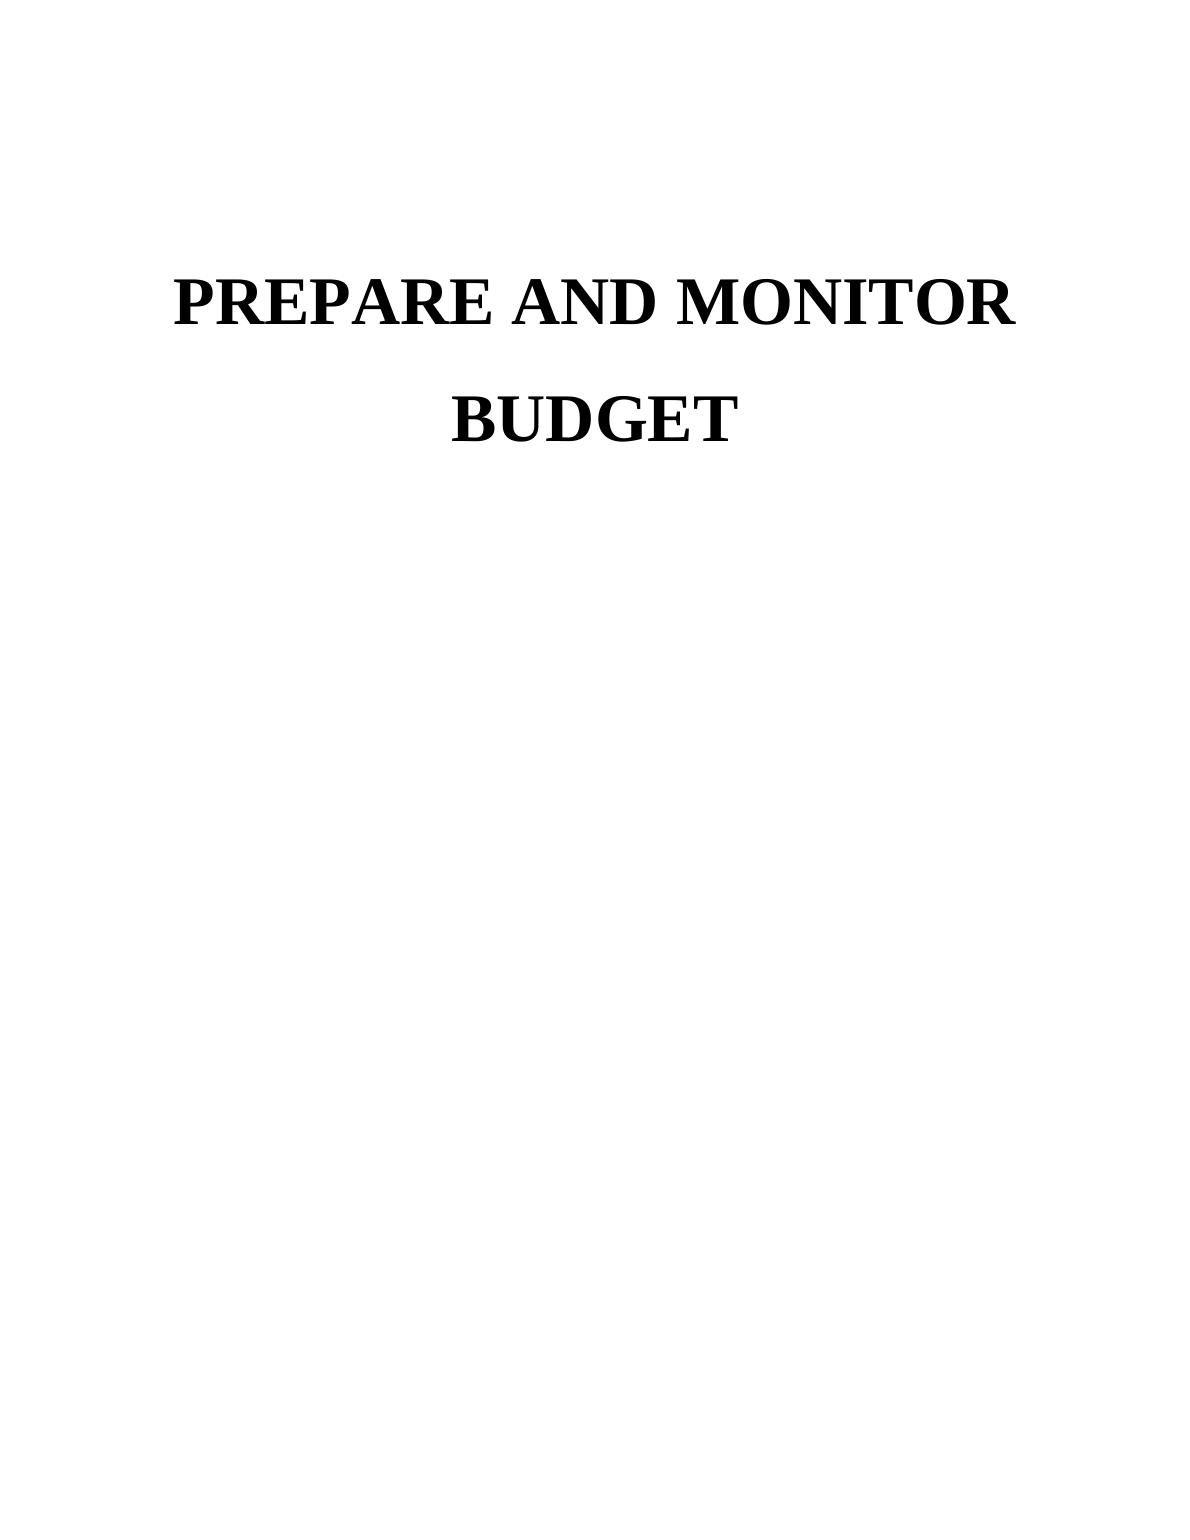 Preparing and Monitor Budget Tool for an Organisation_1